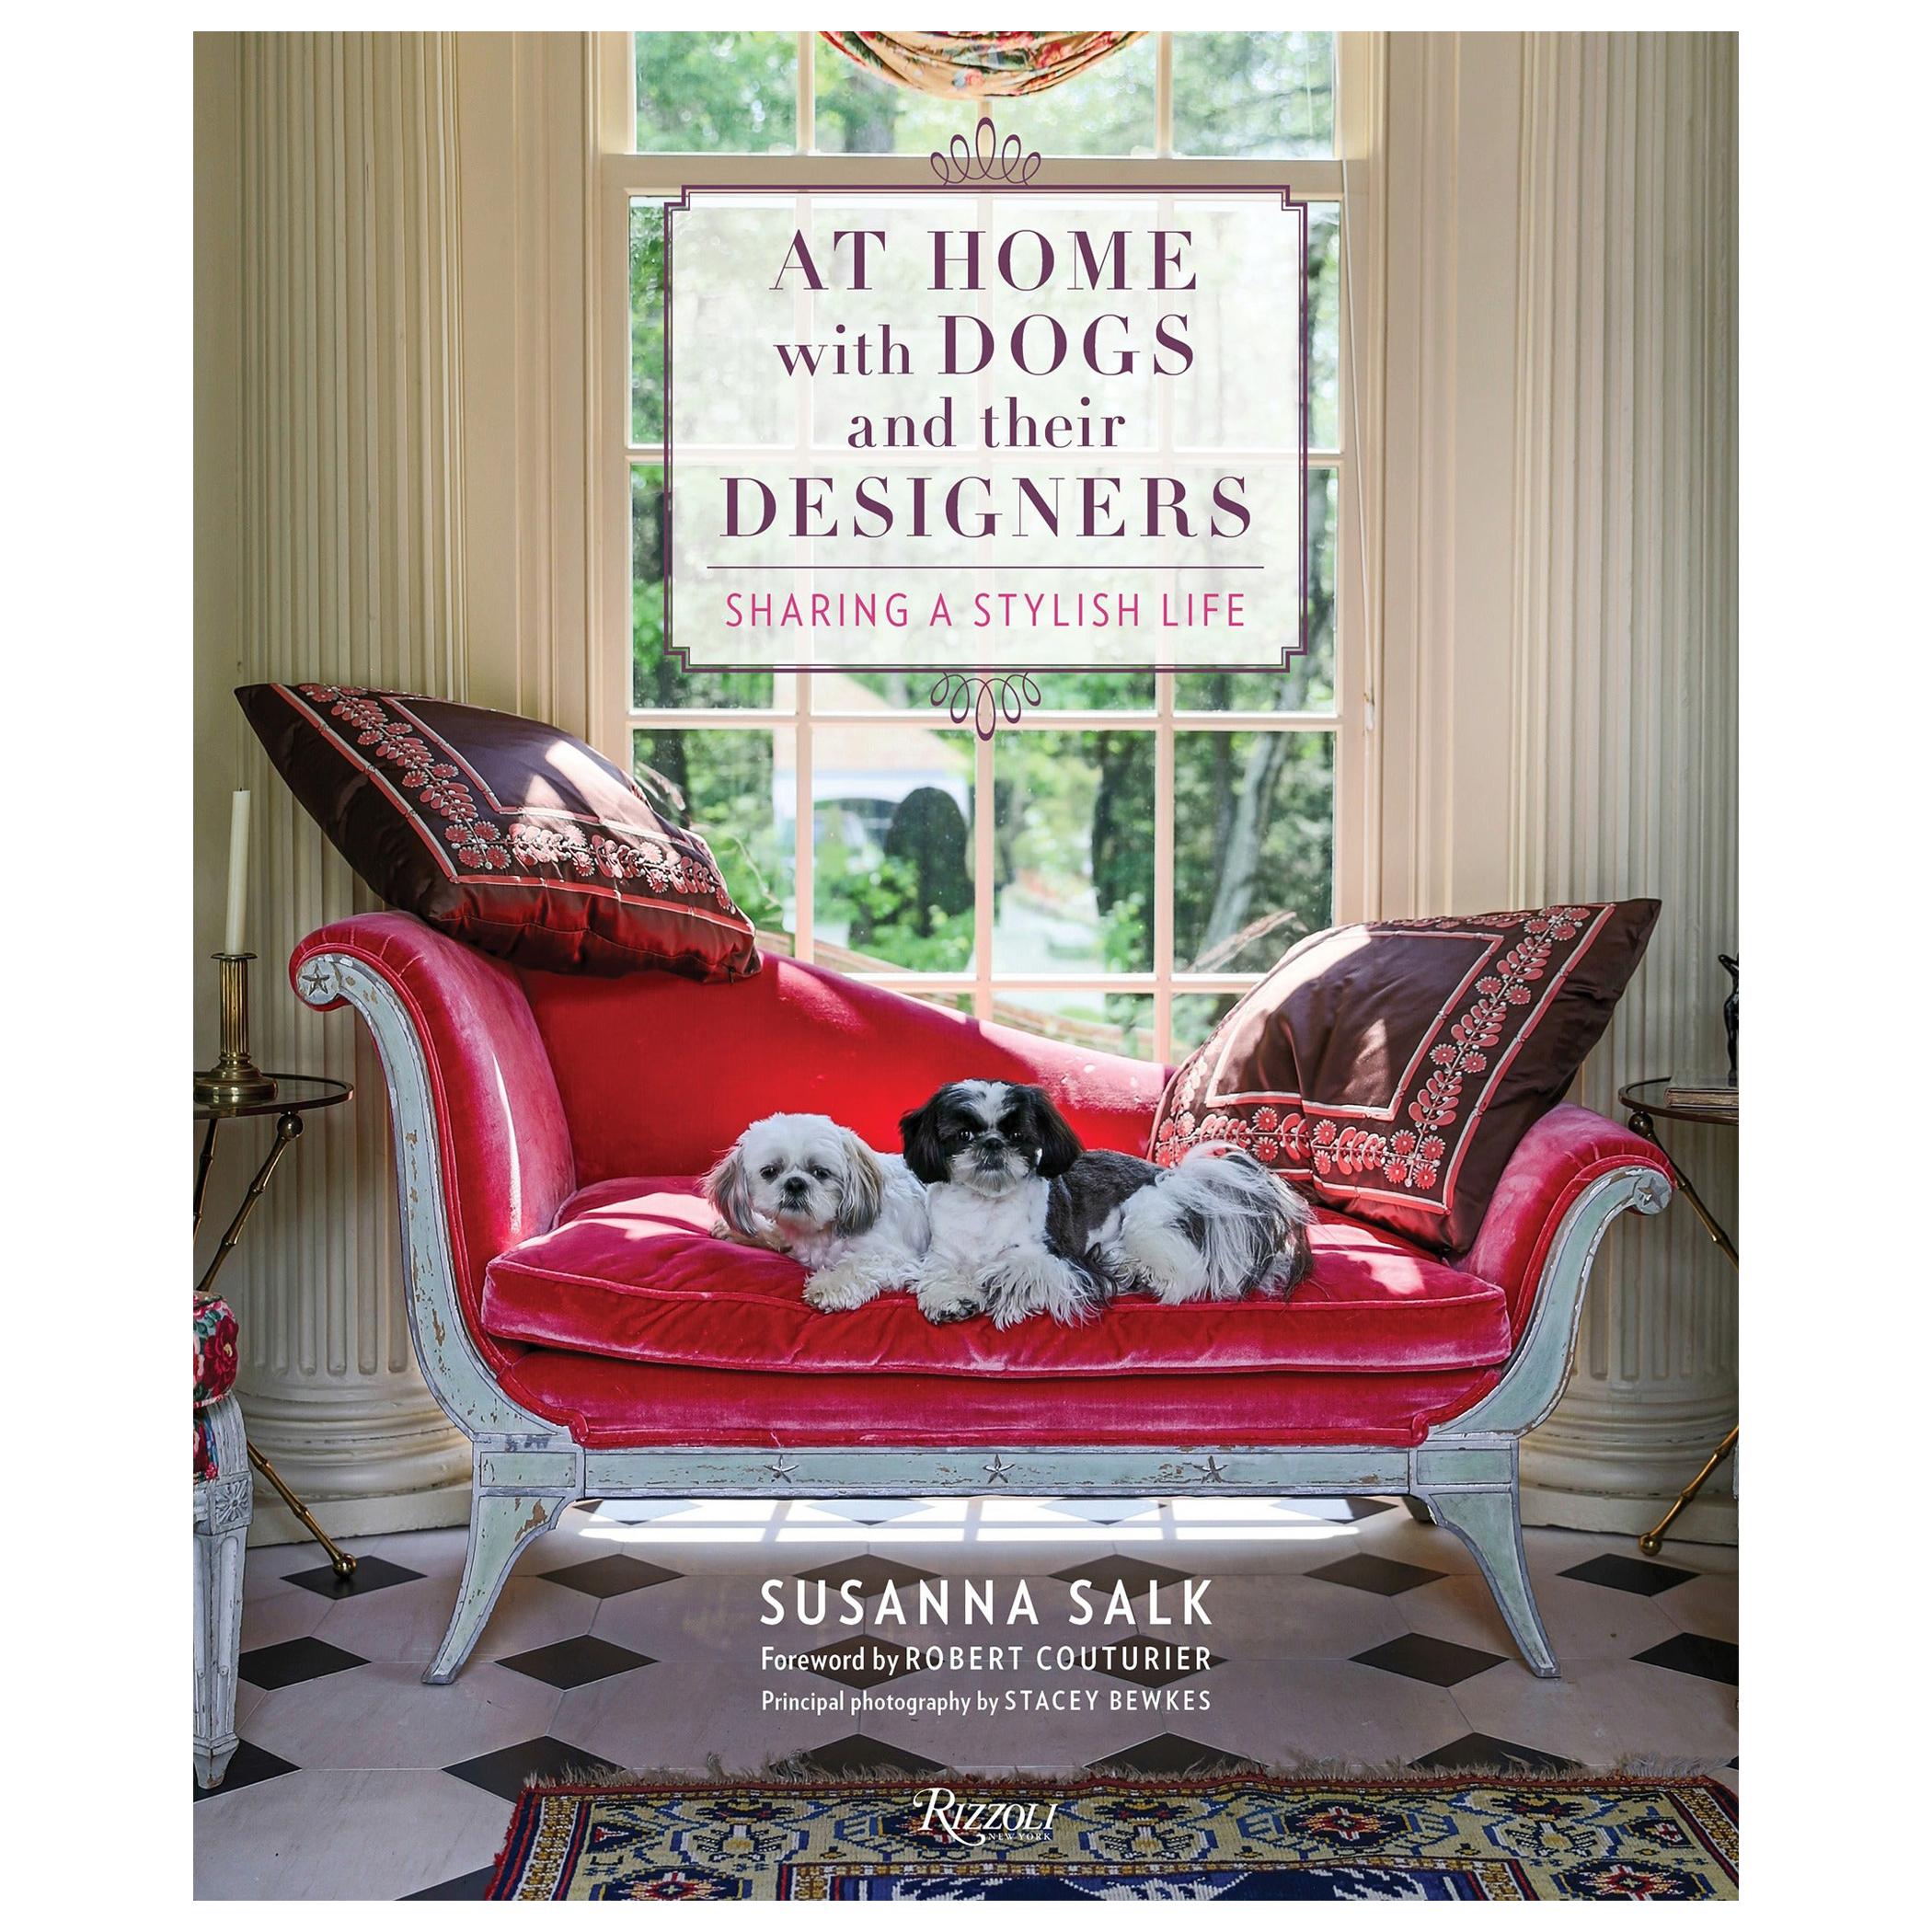 At Home with Dogs and Their Designers Sharing a Stylish Life